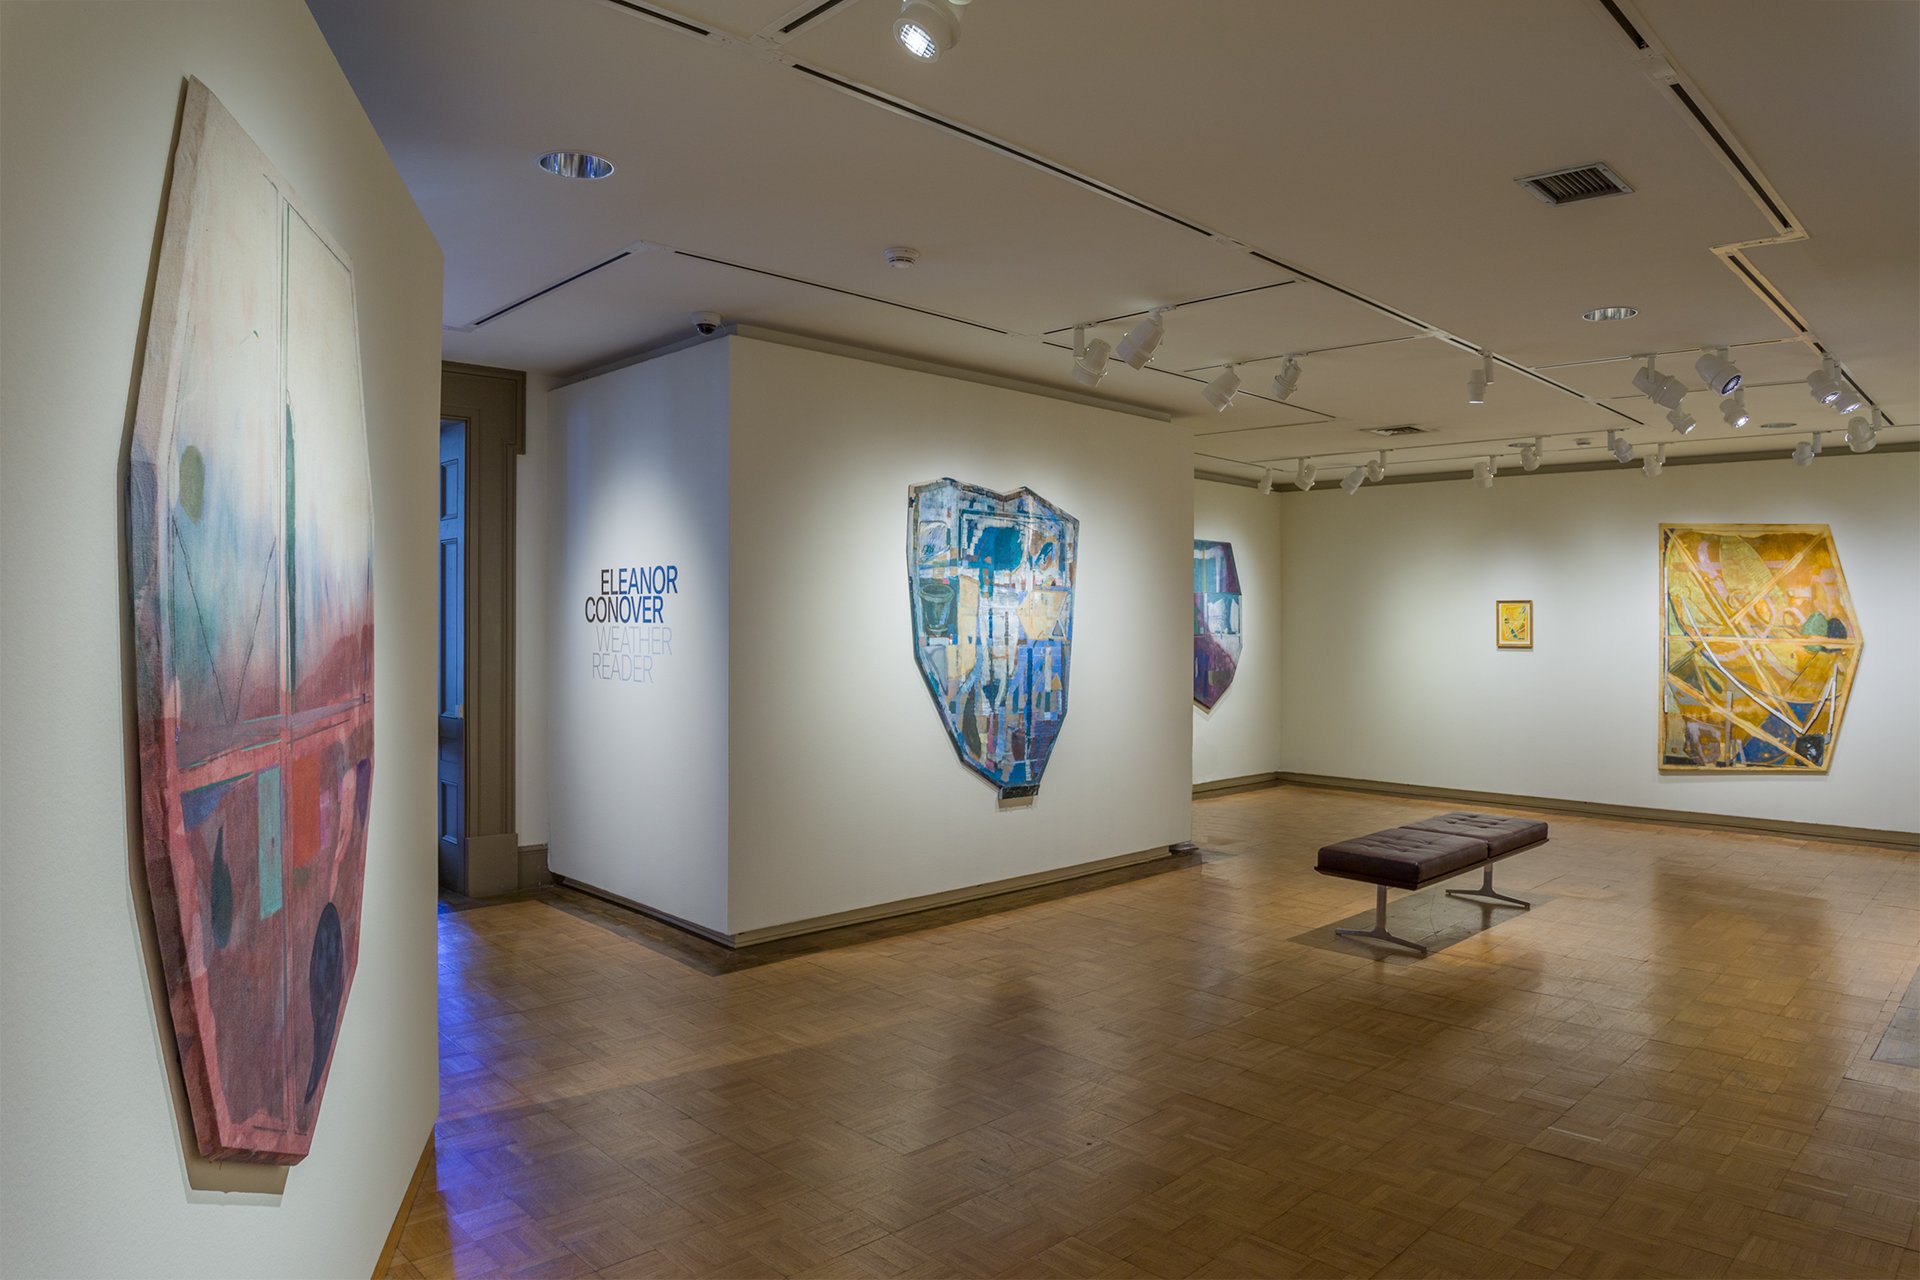  Installation image, Trout Gallery at Dickinson College, 2022 